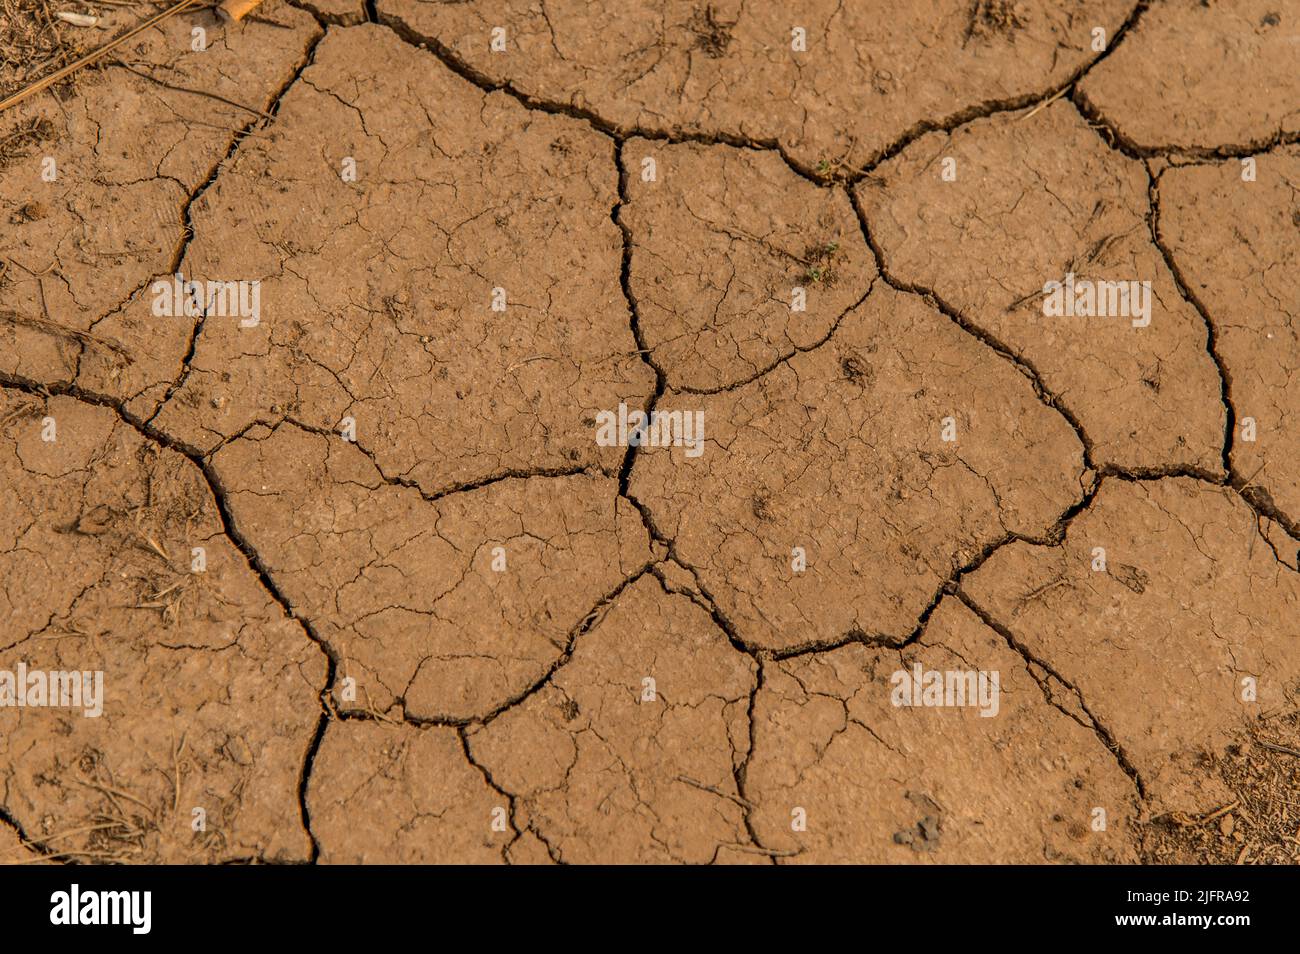 The field after drought with deep cracks in the soil Stock Photo